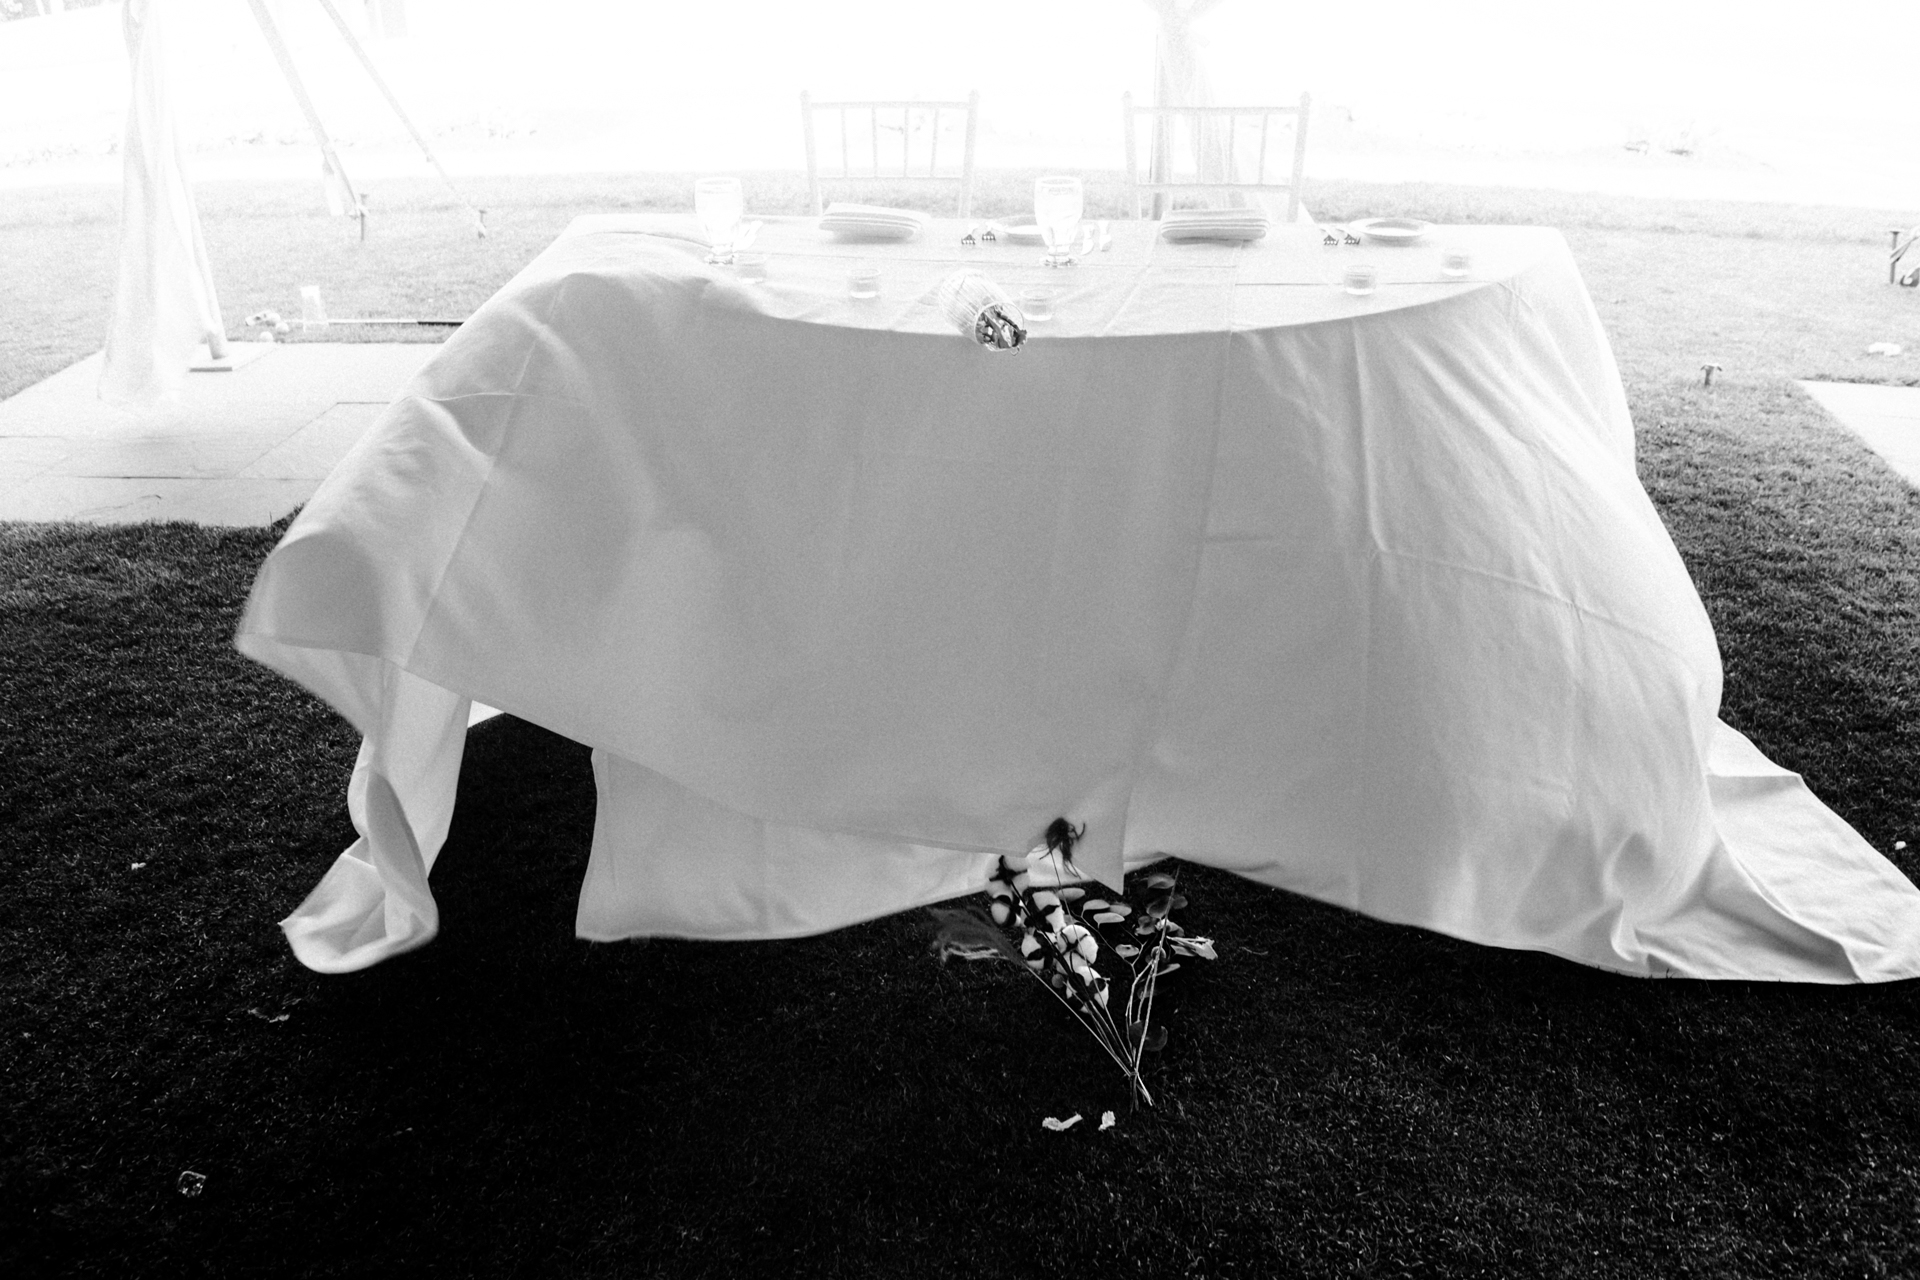 the flower is fall down off the main table by the wind taken by toronto wedding photographer cafa liu